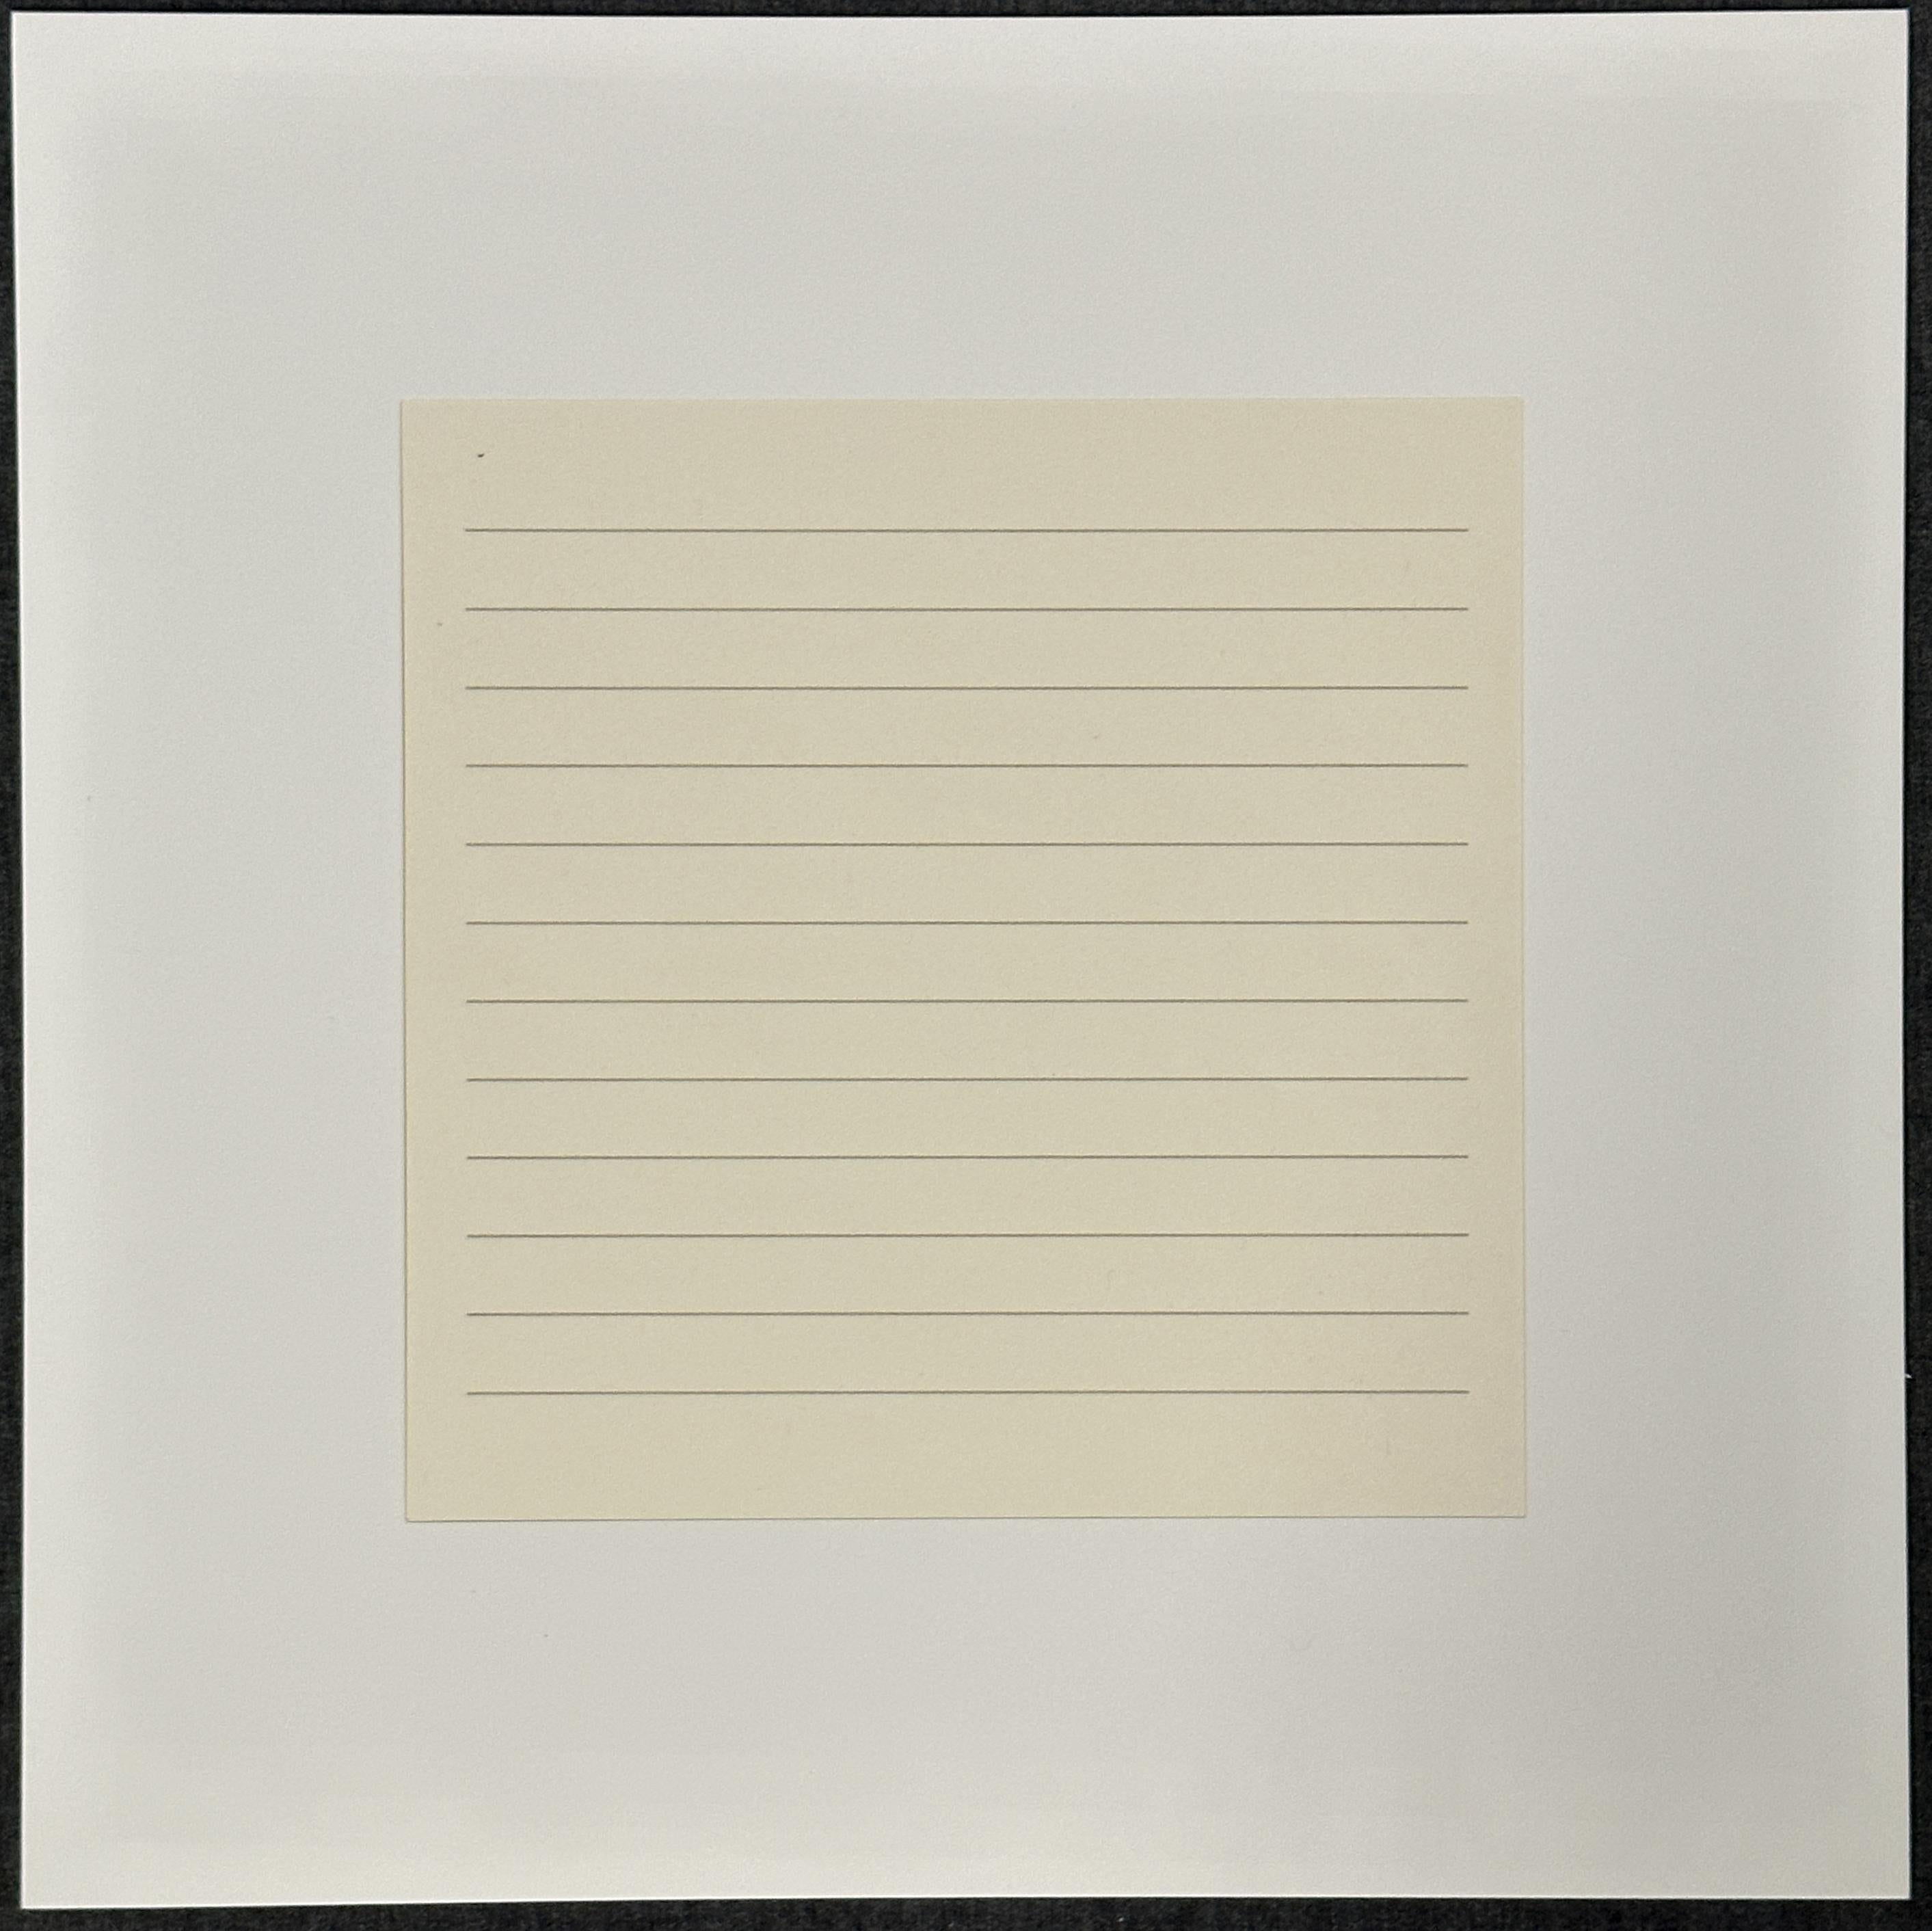  On a Clear Day #15  1973   - Print by Agnes Martin